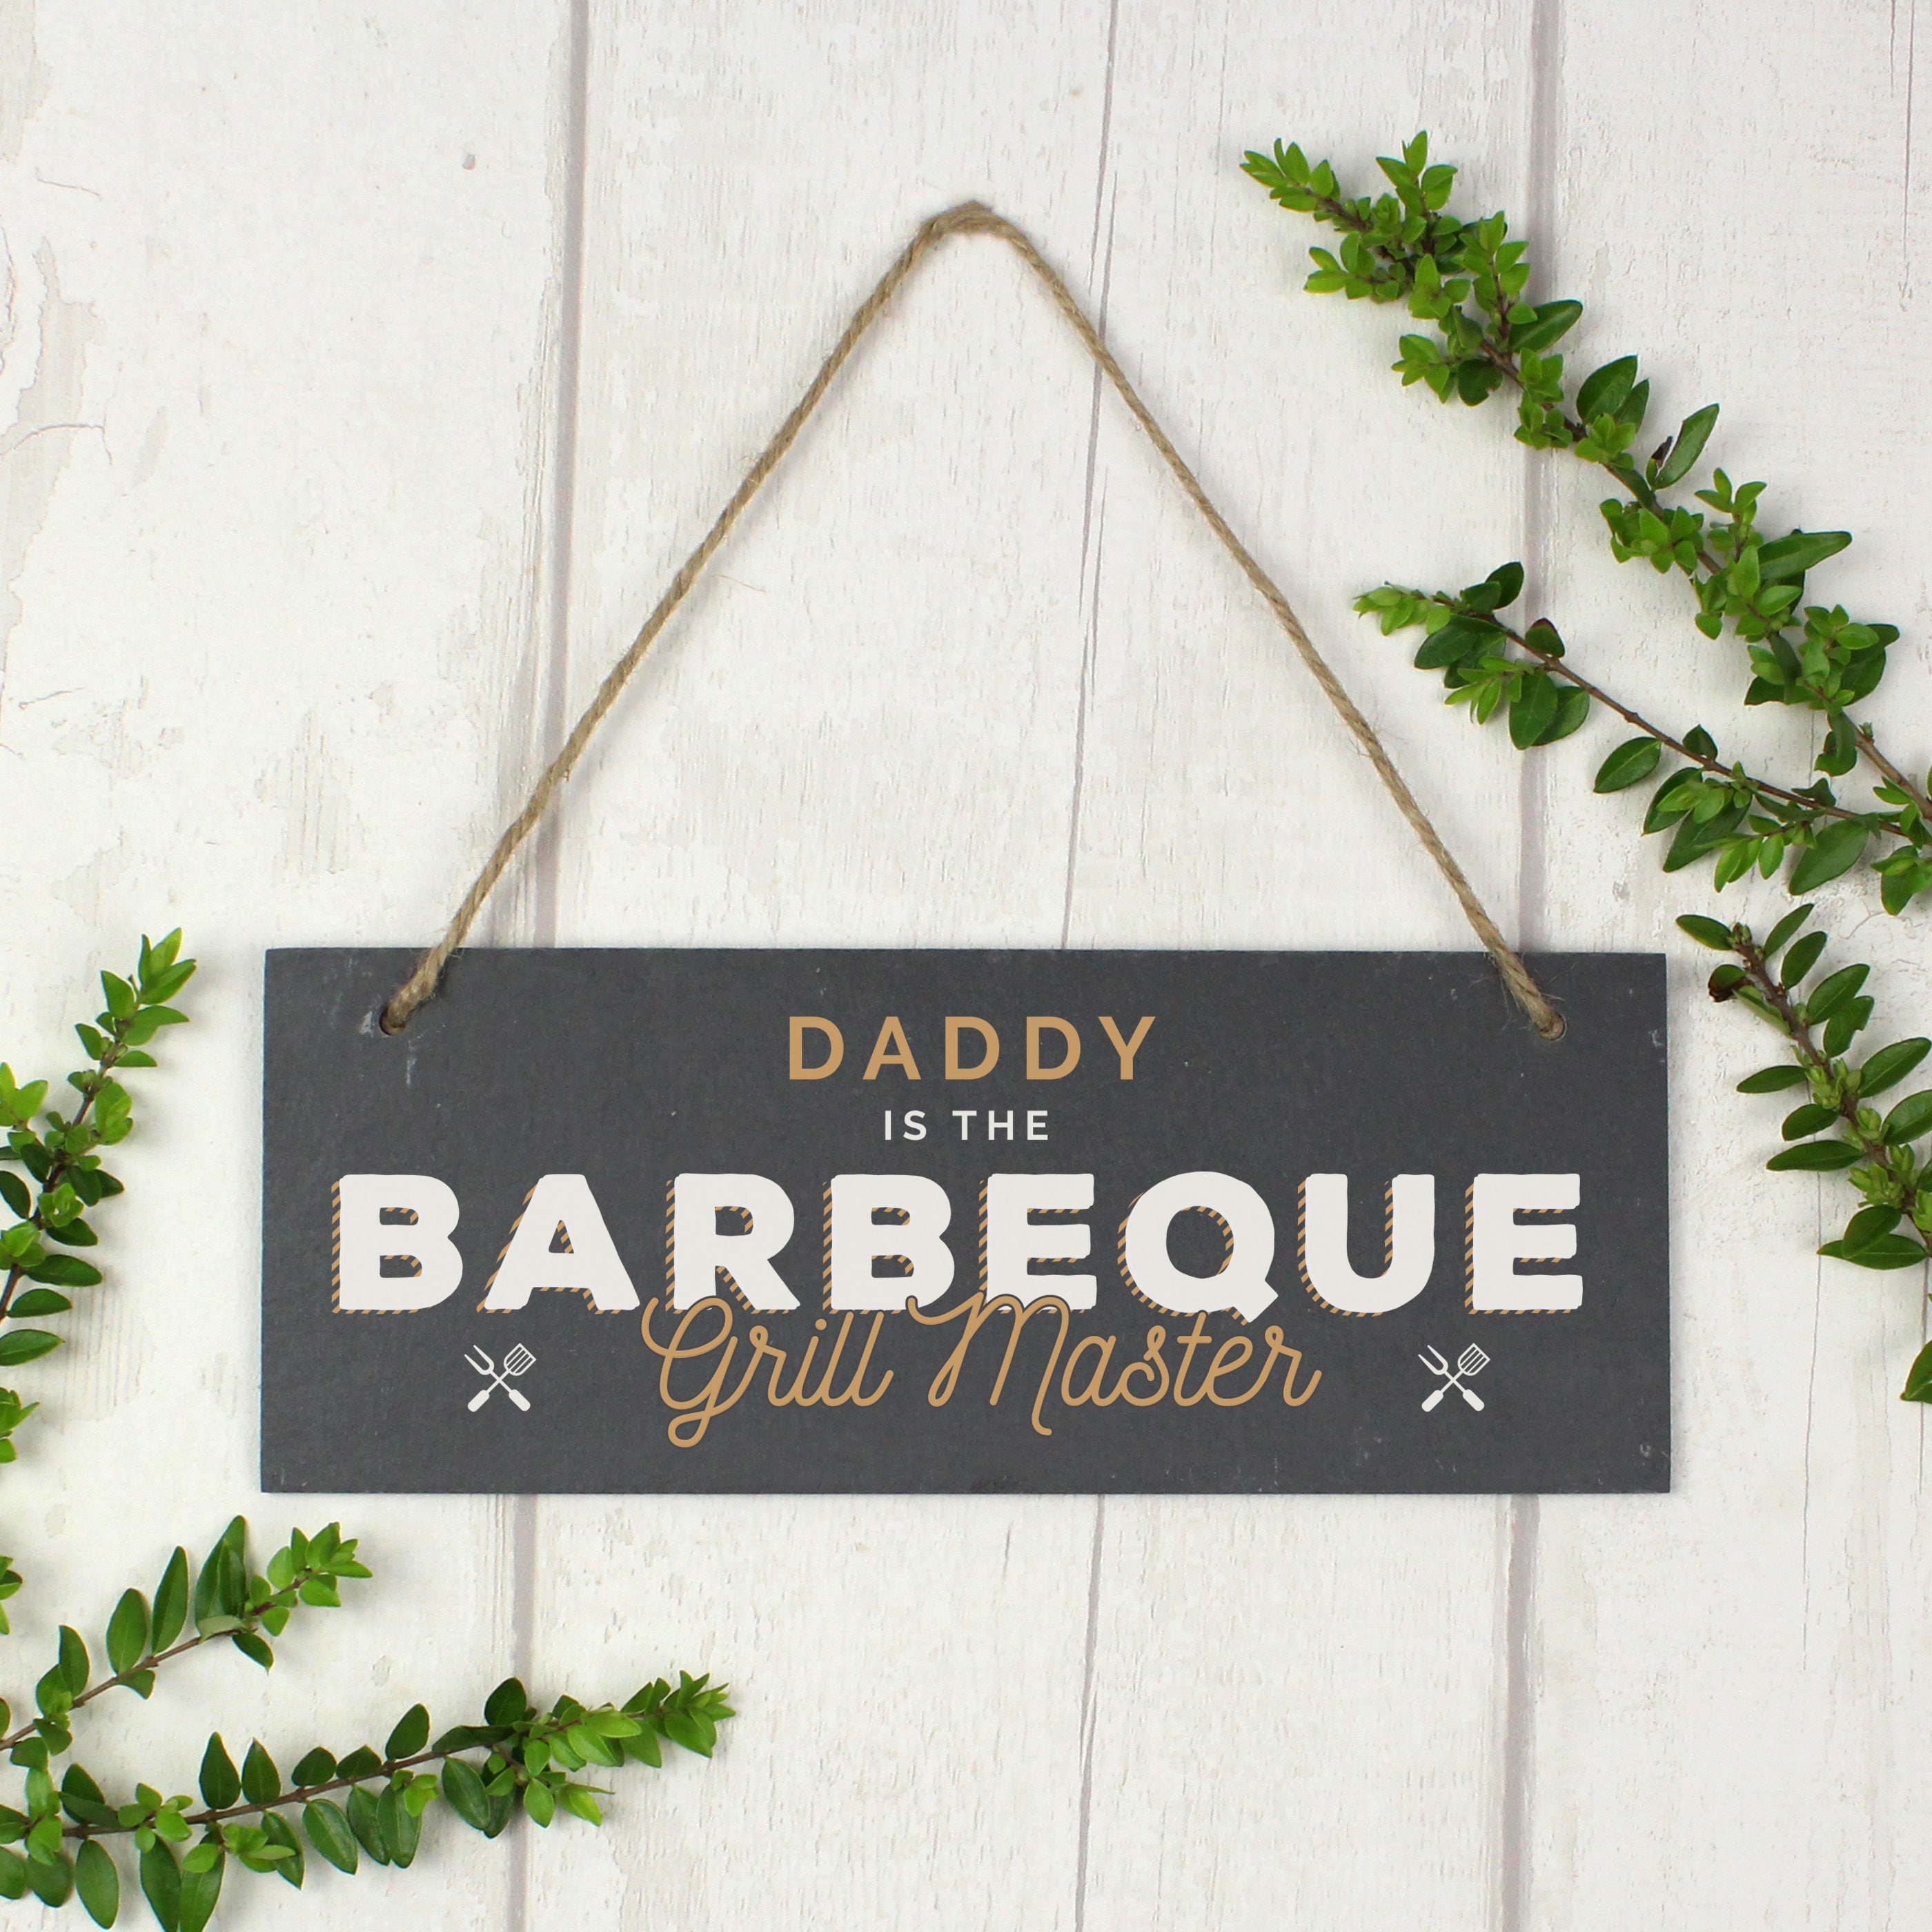 Barbeque Grill Master Novelty Sign